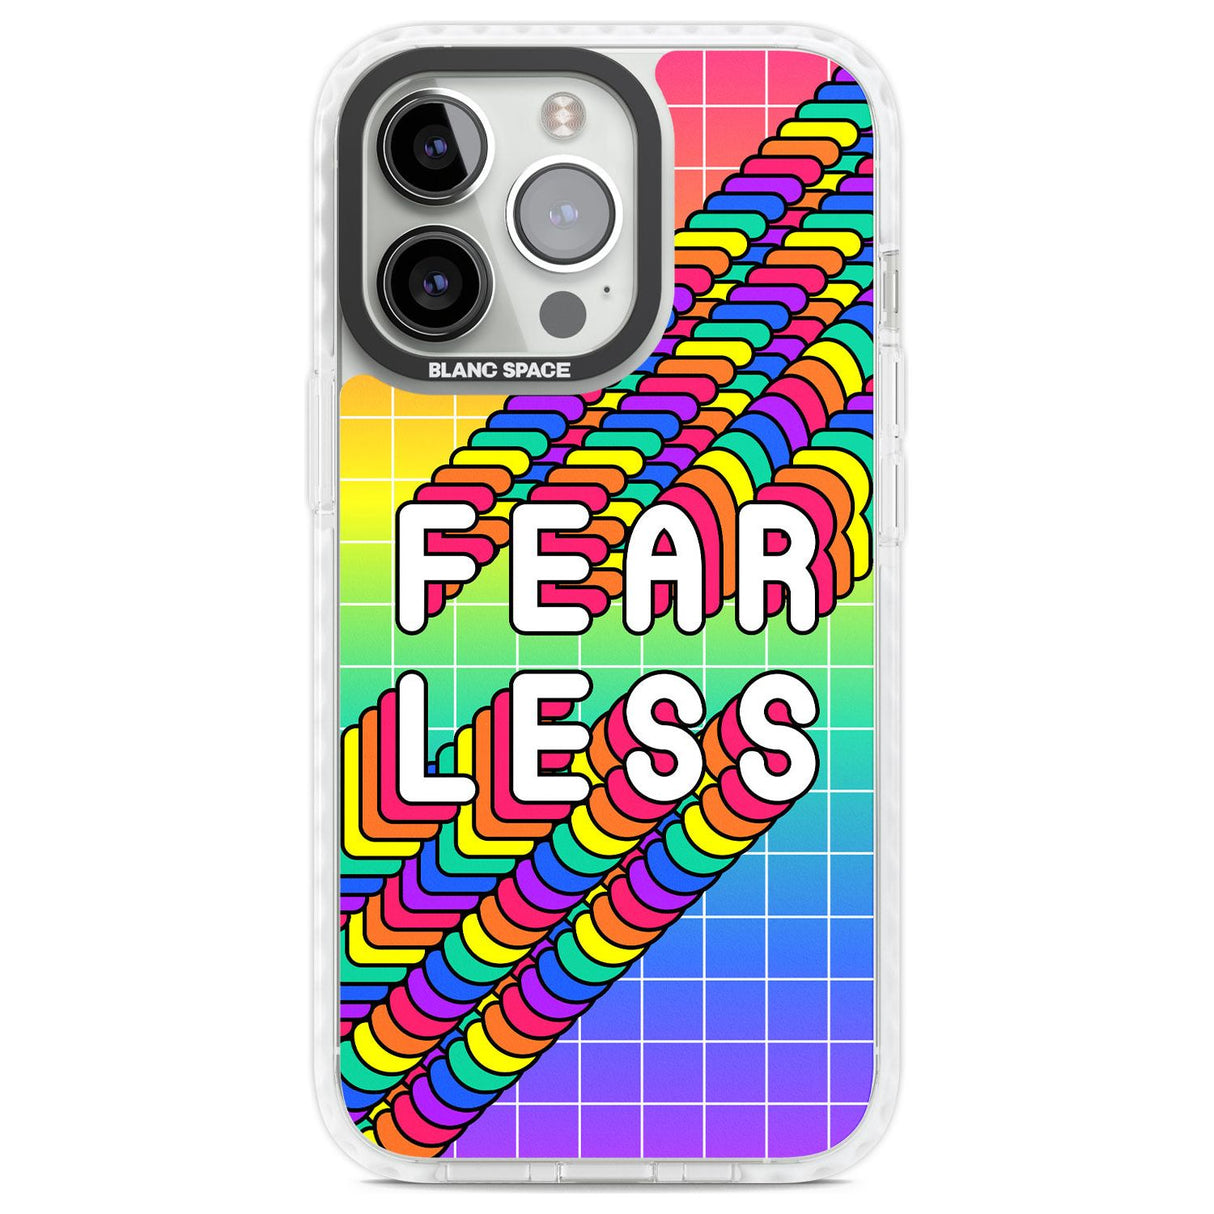 Fearless Phone Case iPhone 13 Pro / Impact Case,iPhone 14 Pro / Impact Case,iPhone 15 Pro Max / Impact Case,iPhone 15 Pro / Impact Case Blanc Space